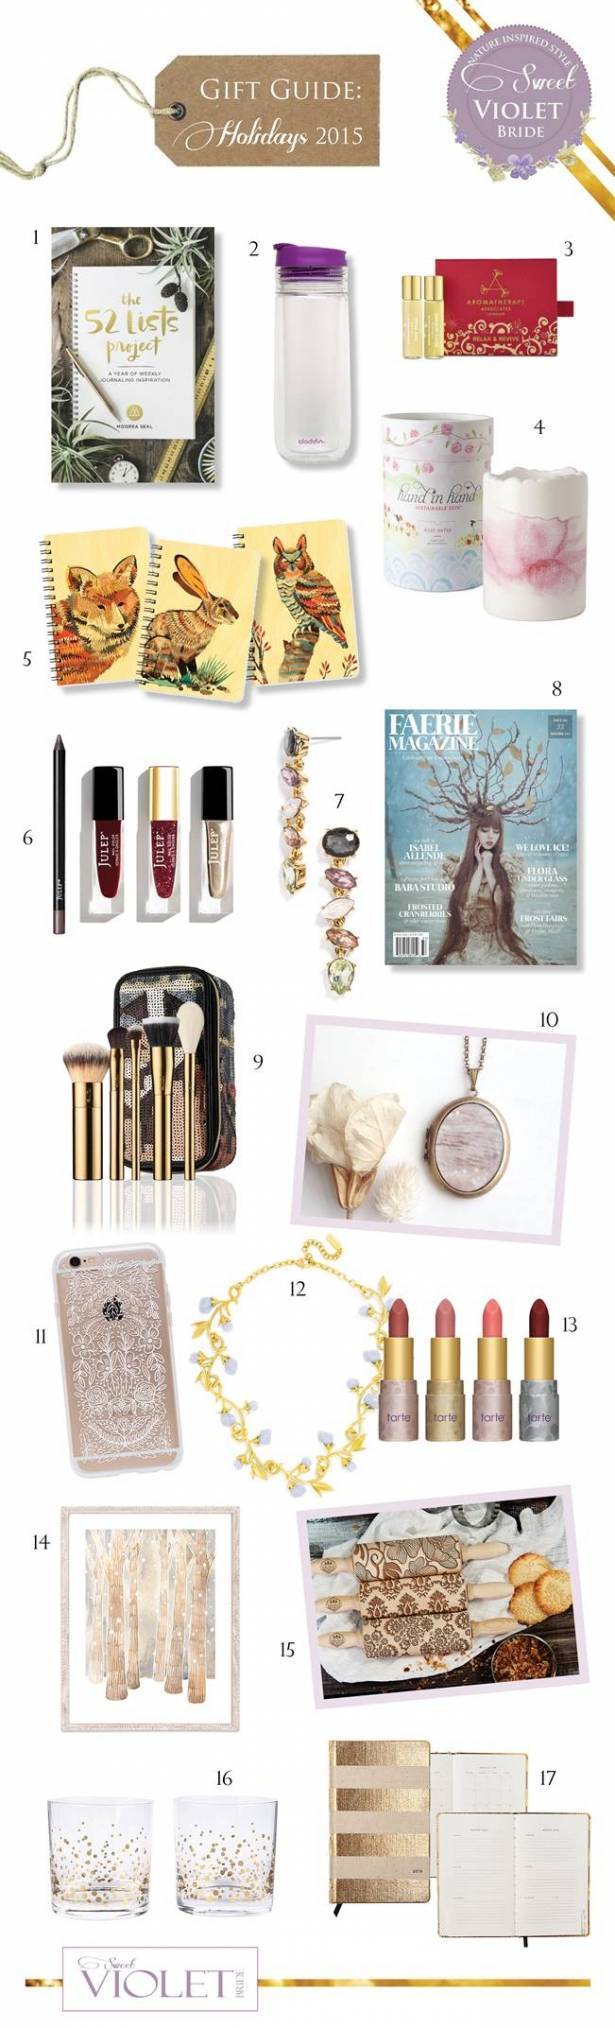 Favorite Things: Holiday Gift Guide 2015 79